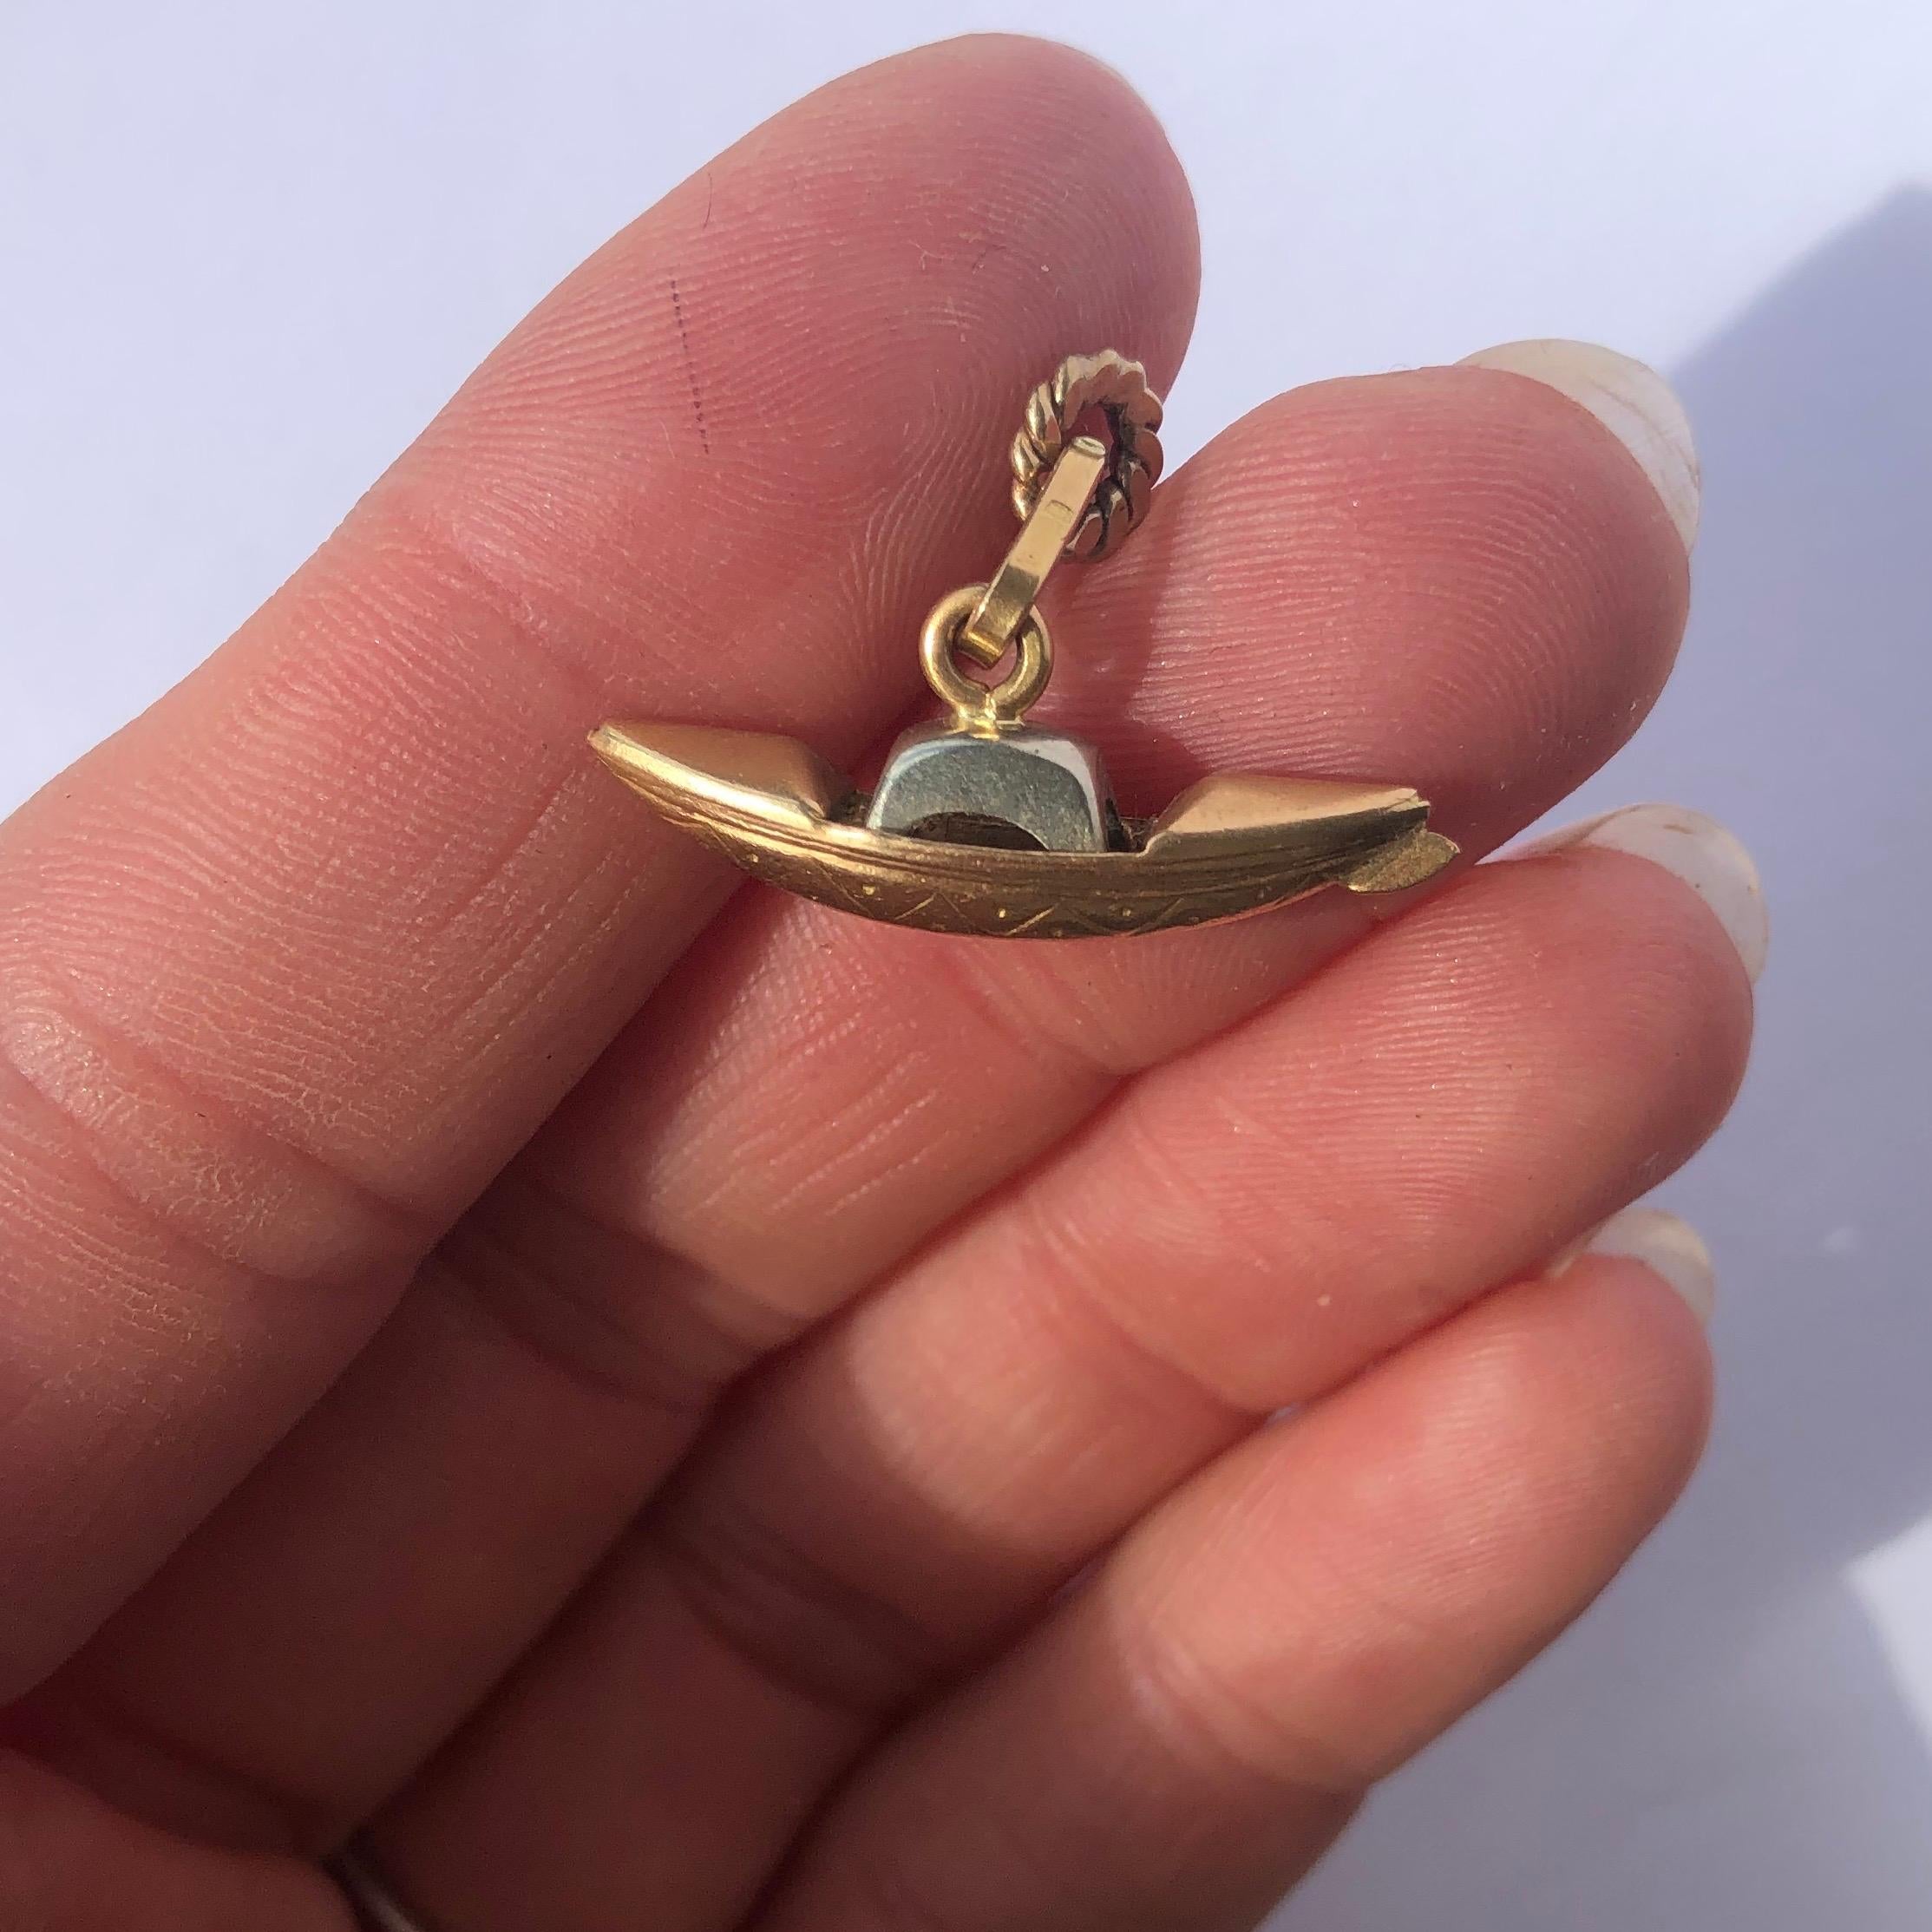 Vintage 9 Carat Boat Charm In Good Condition For Sale In Chipping Campden, GB